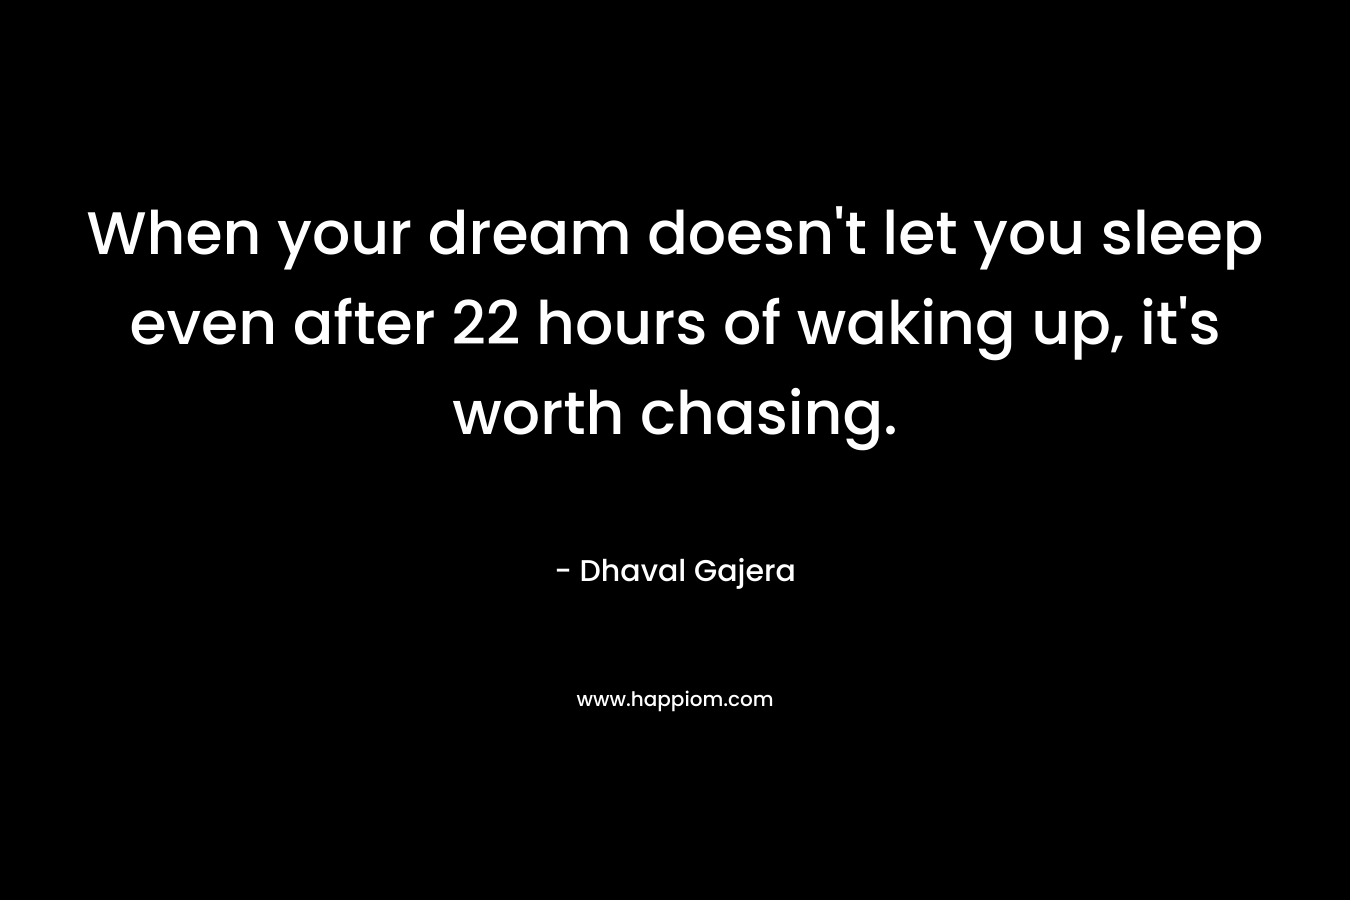 When your dream doesn't let you sleep even after 22 hours of waking up, it's worth chasing.